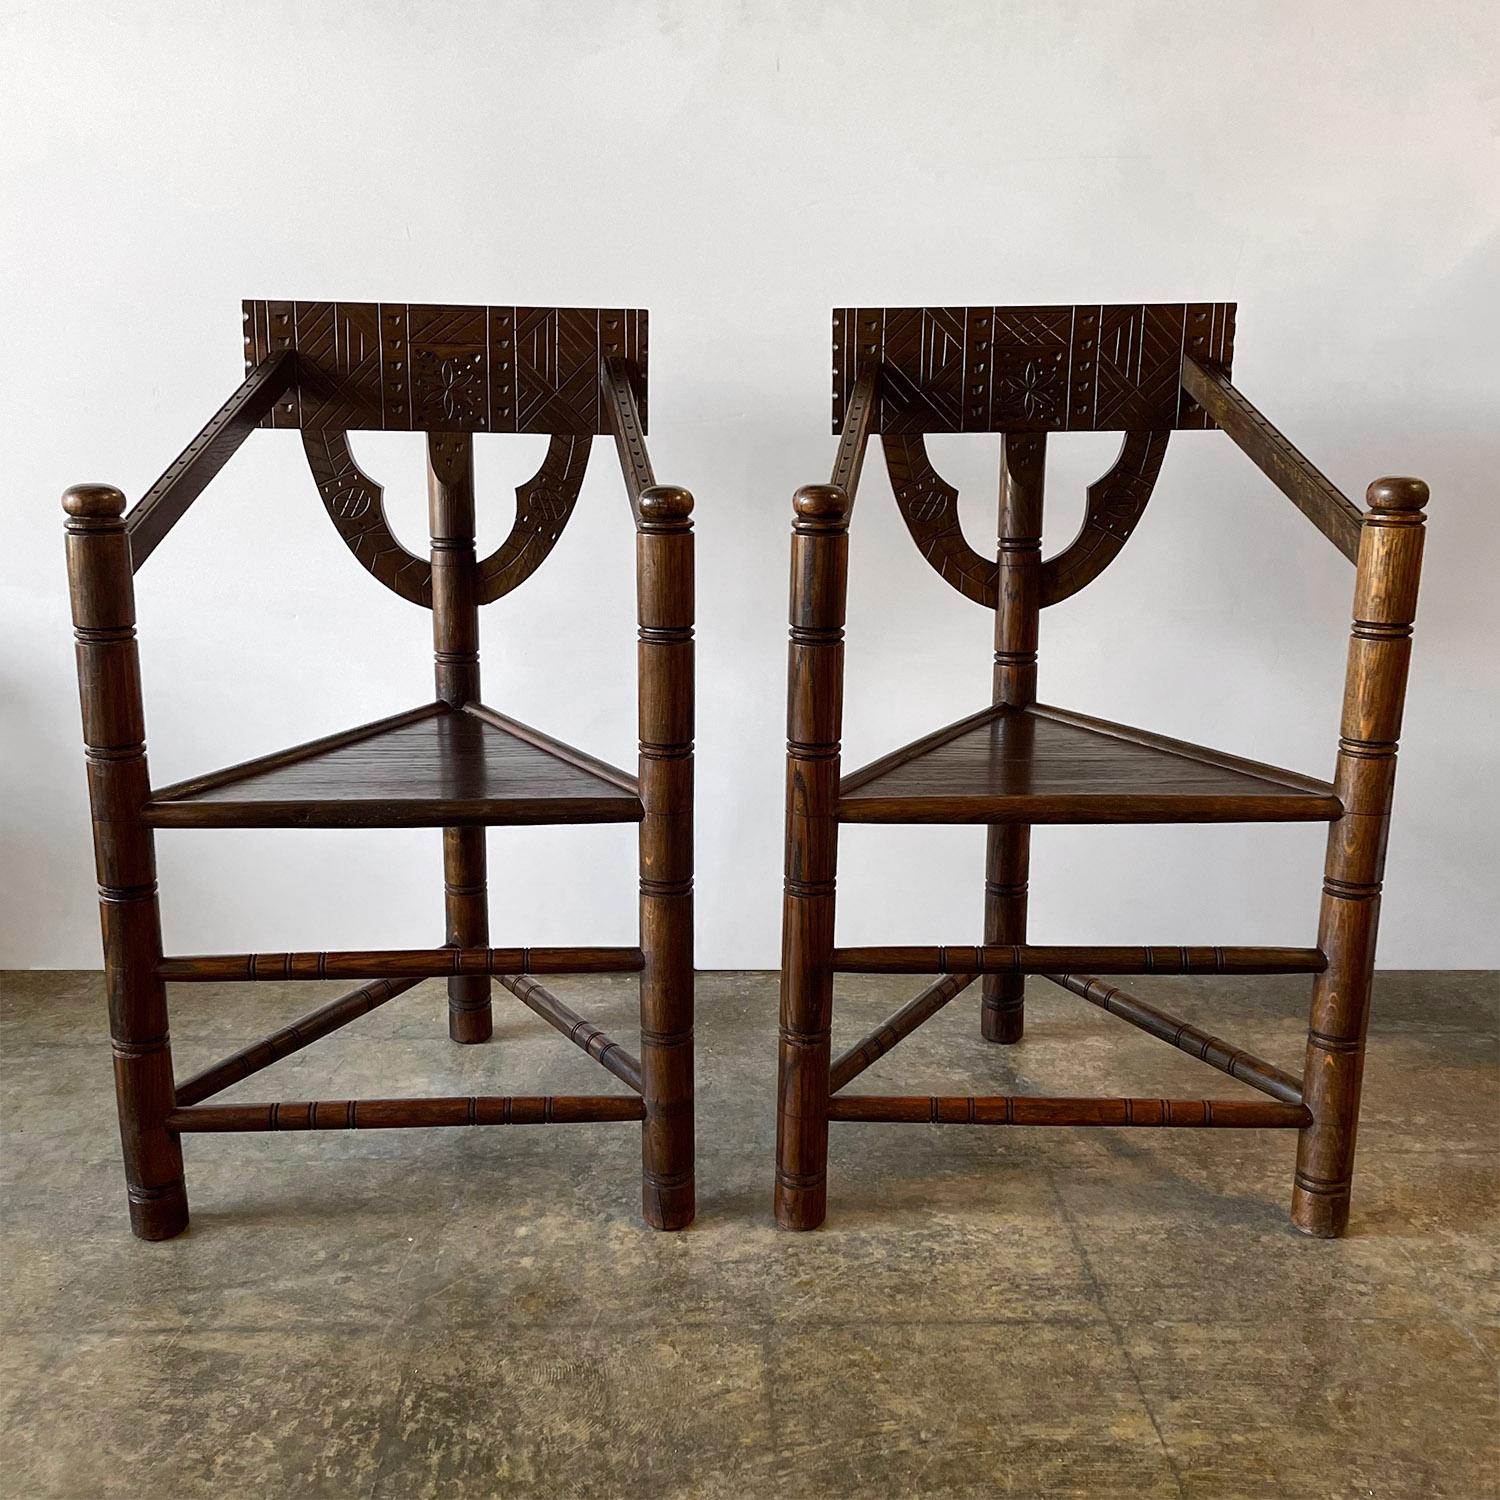 Swedish primitive monk chairs
Sweden, early 20th century
Each chair is unique in its composition and design
Made of solid oak and with intricately carved patterns and markings
Patina from age and use
Newly reconditioned
Perfectly imperfect
Timeless